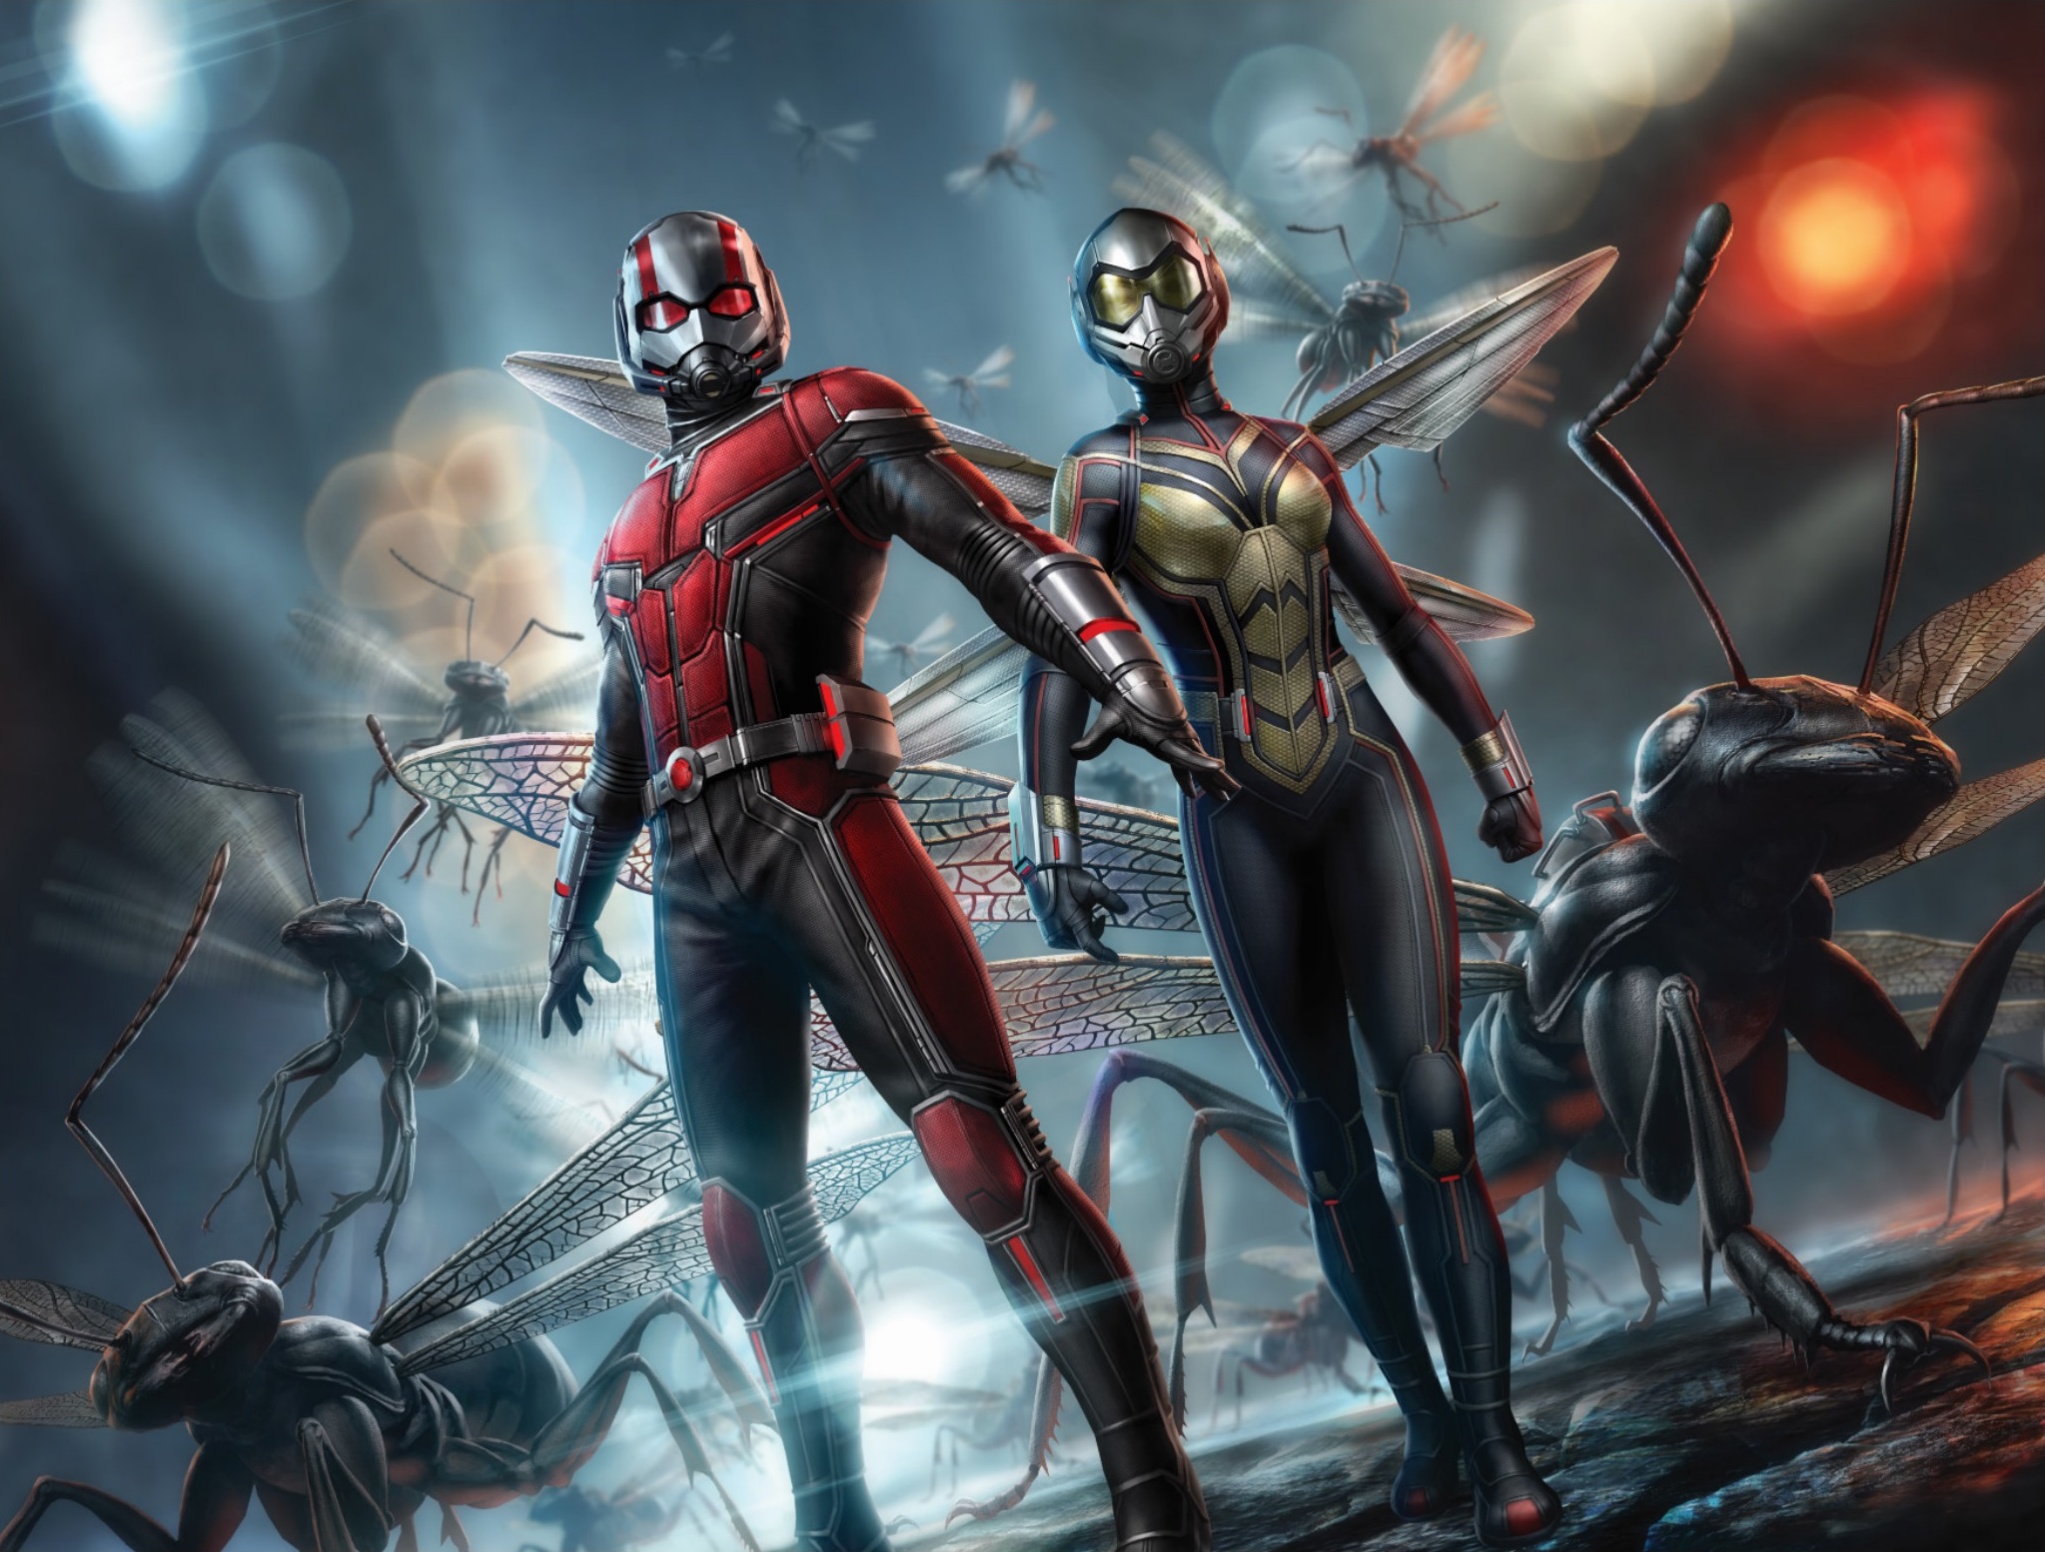 Ant-Man And The Wasp Dolby Cinema Poster Released